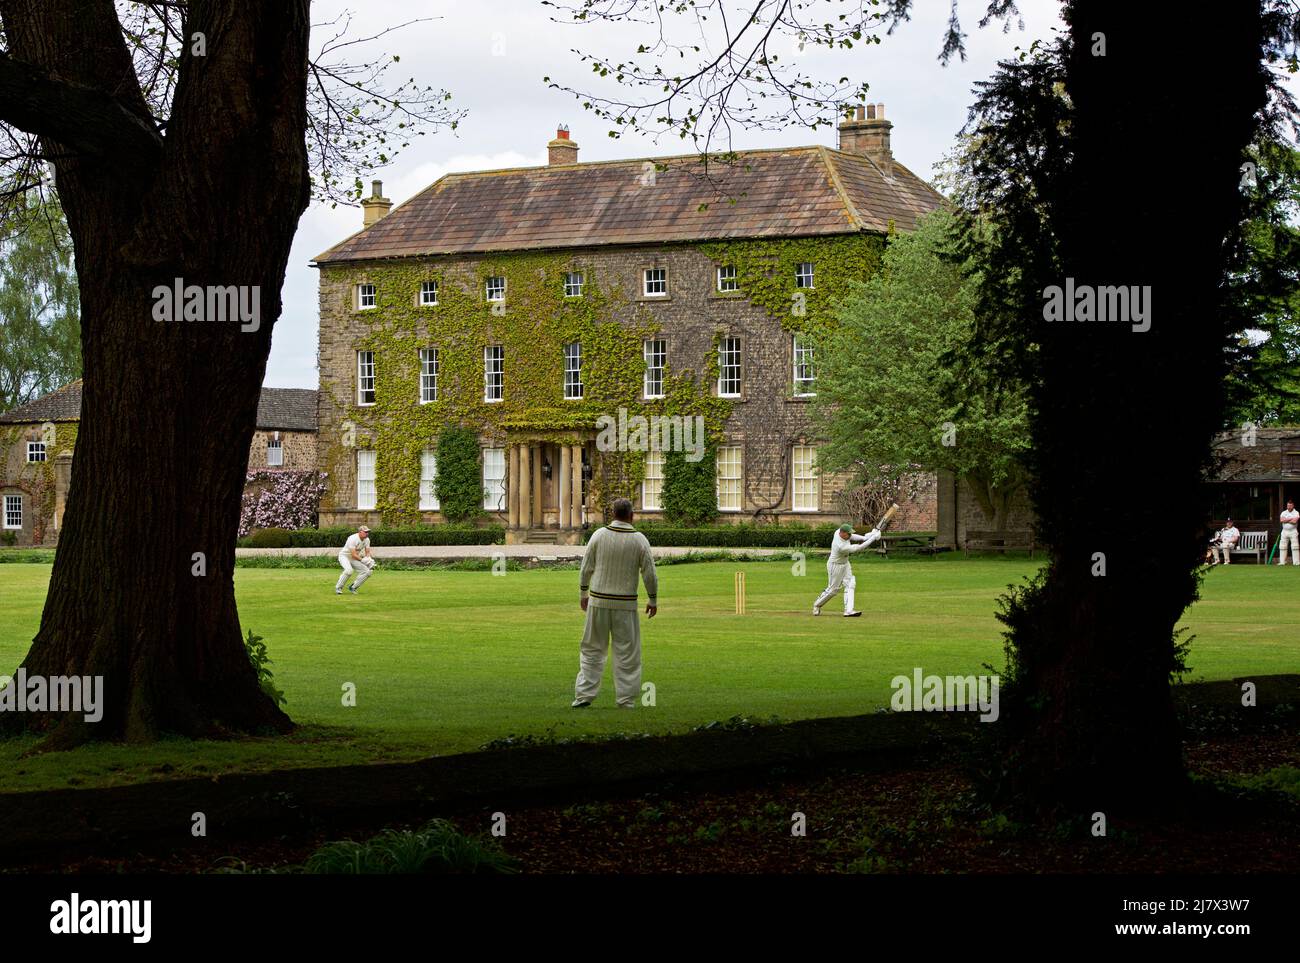 Cricket match in progress in the village of Crakehall, North Yorkshire, England UK Stock Photo